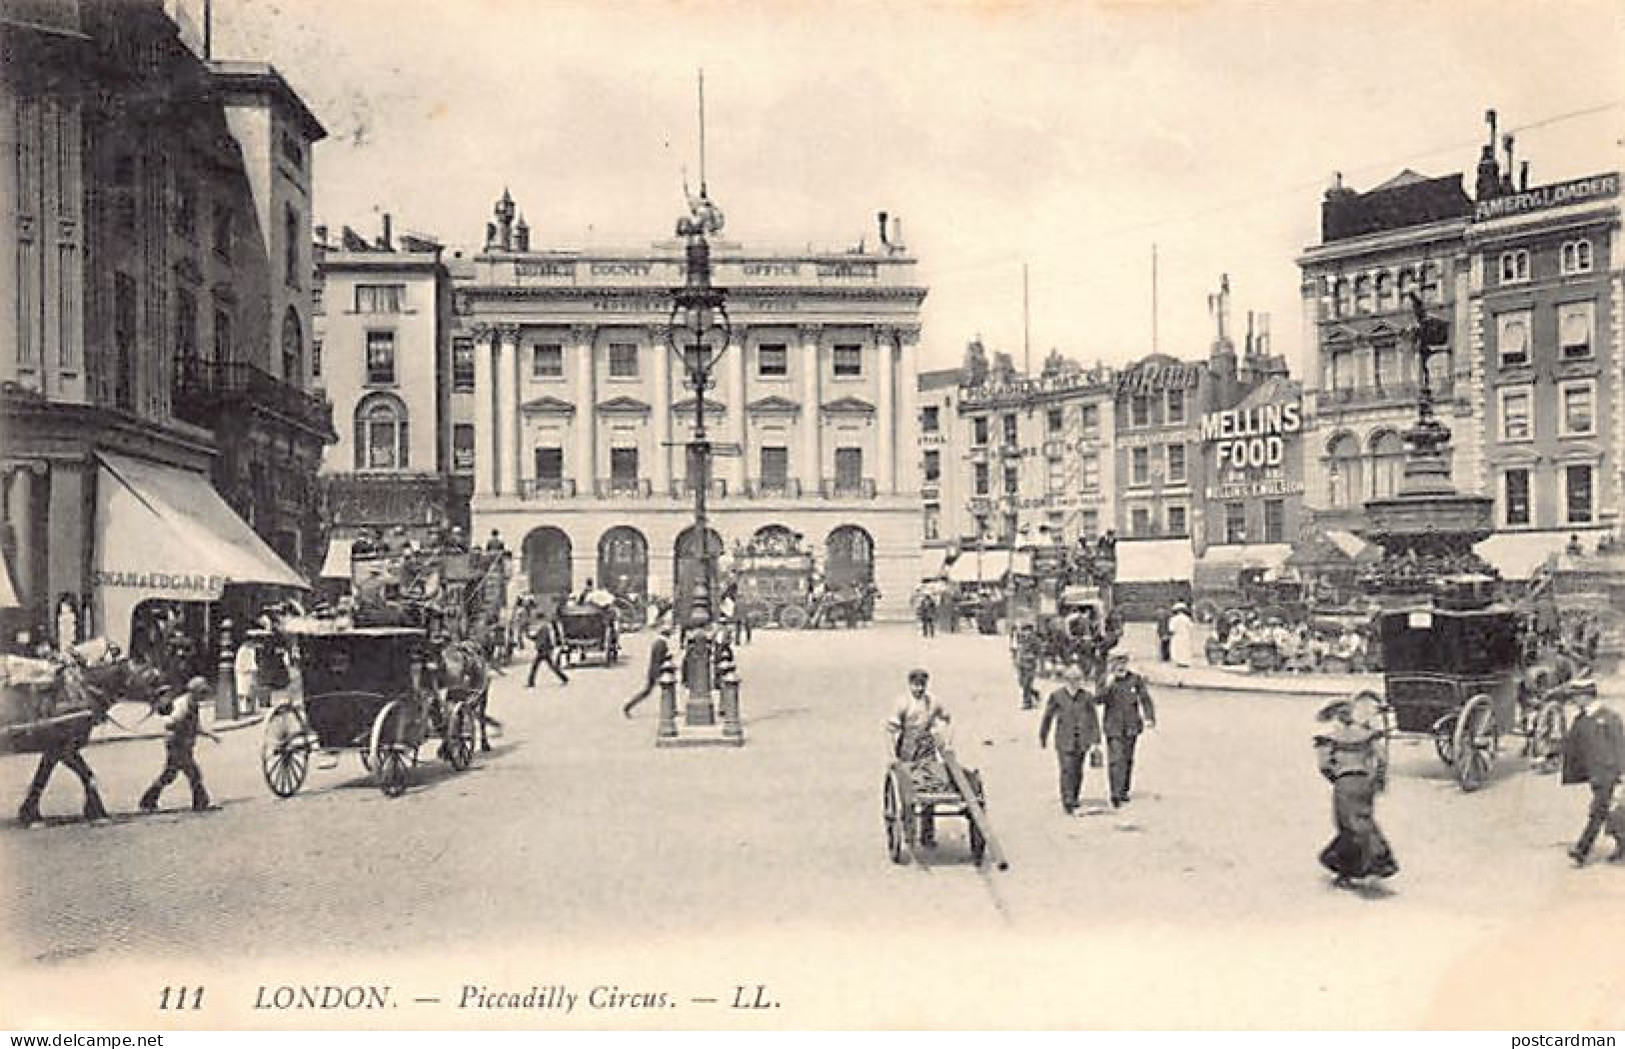 England - LONDON - Picadilly Circus - Publ. Levy L.L. 111 - Piccadilly Circus